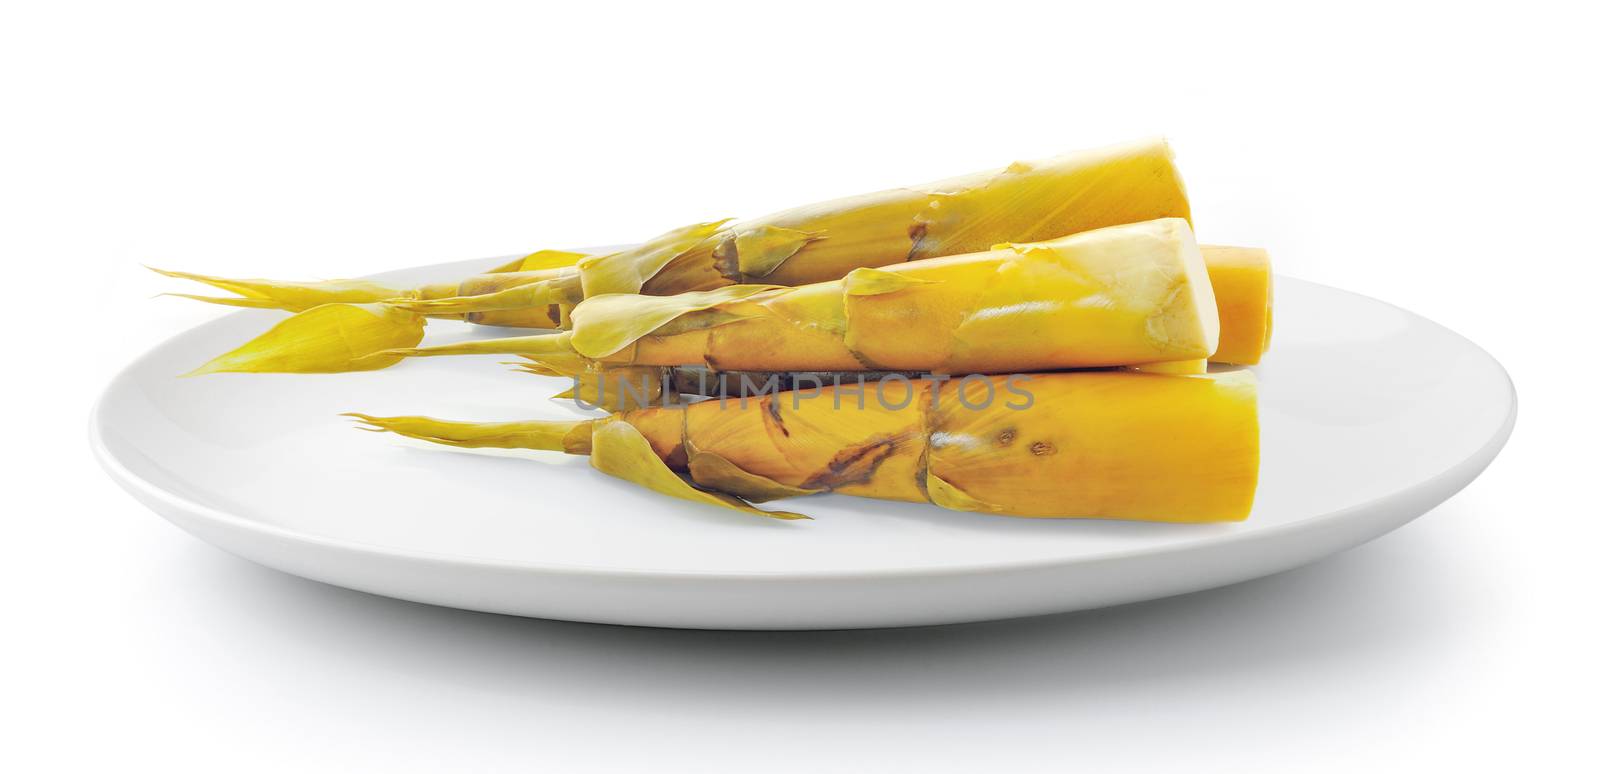 Bamboo shoot in plate isolated on a white background by sommai